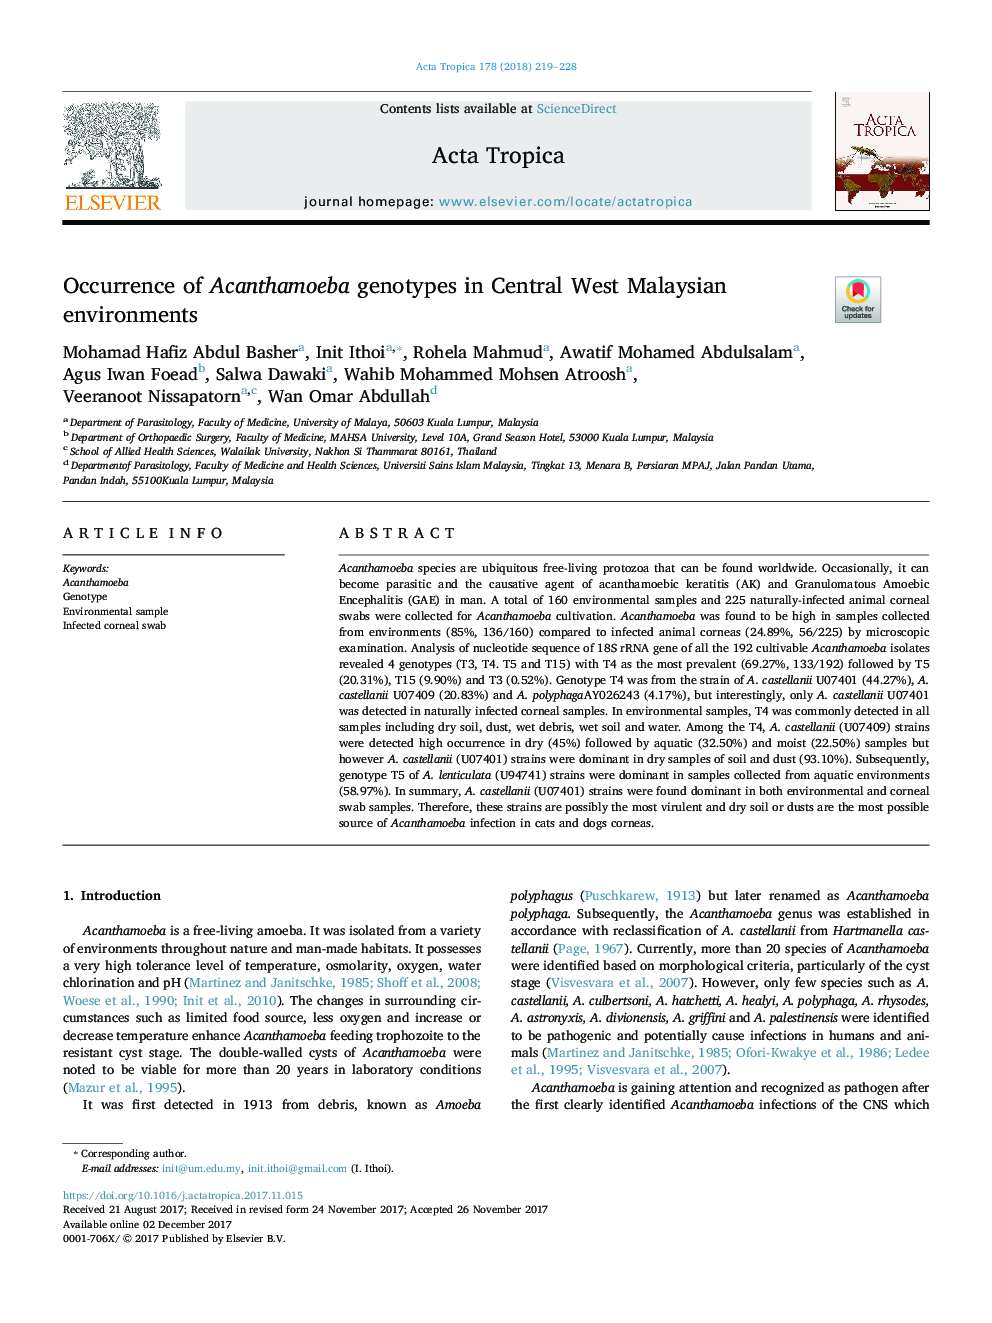 Occurrence of Acanthamoeba genotypes in Central West Malaysian environments